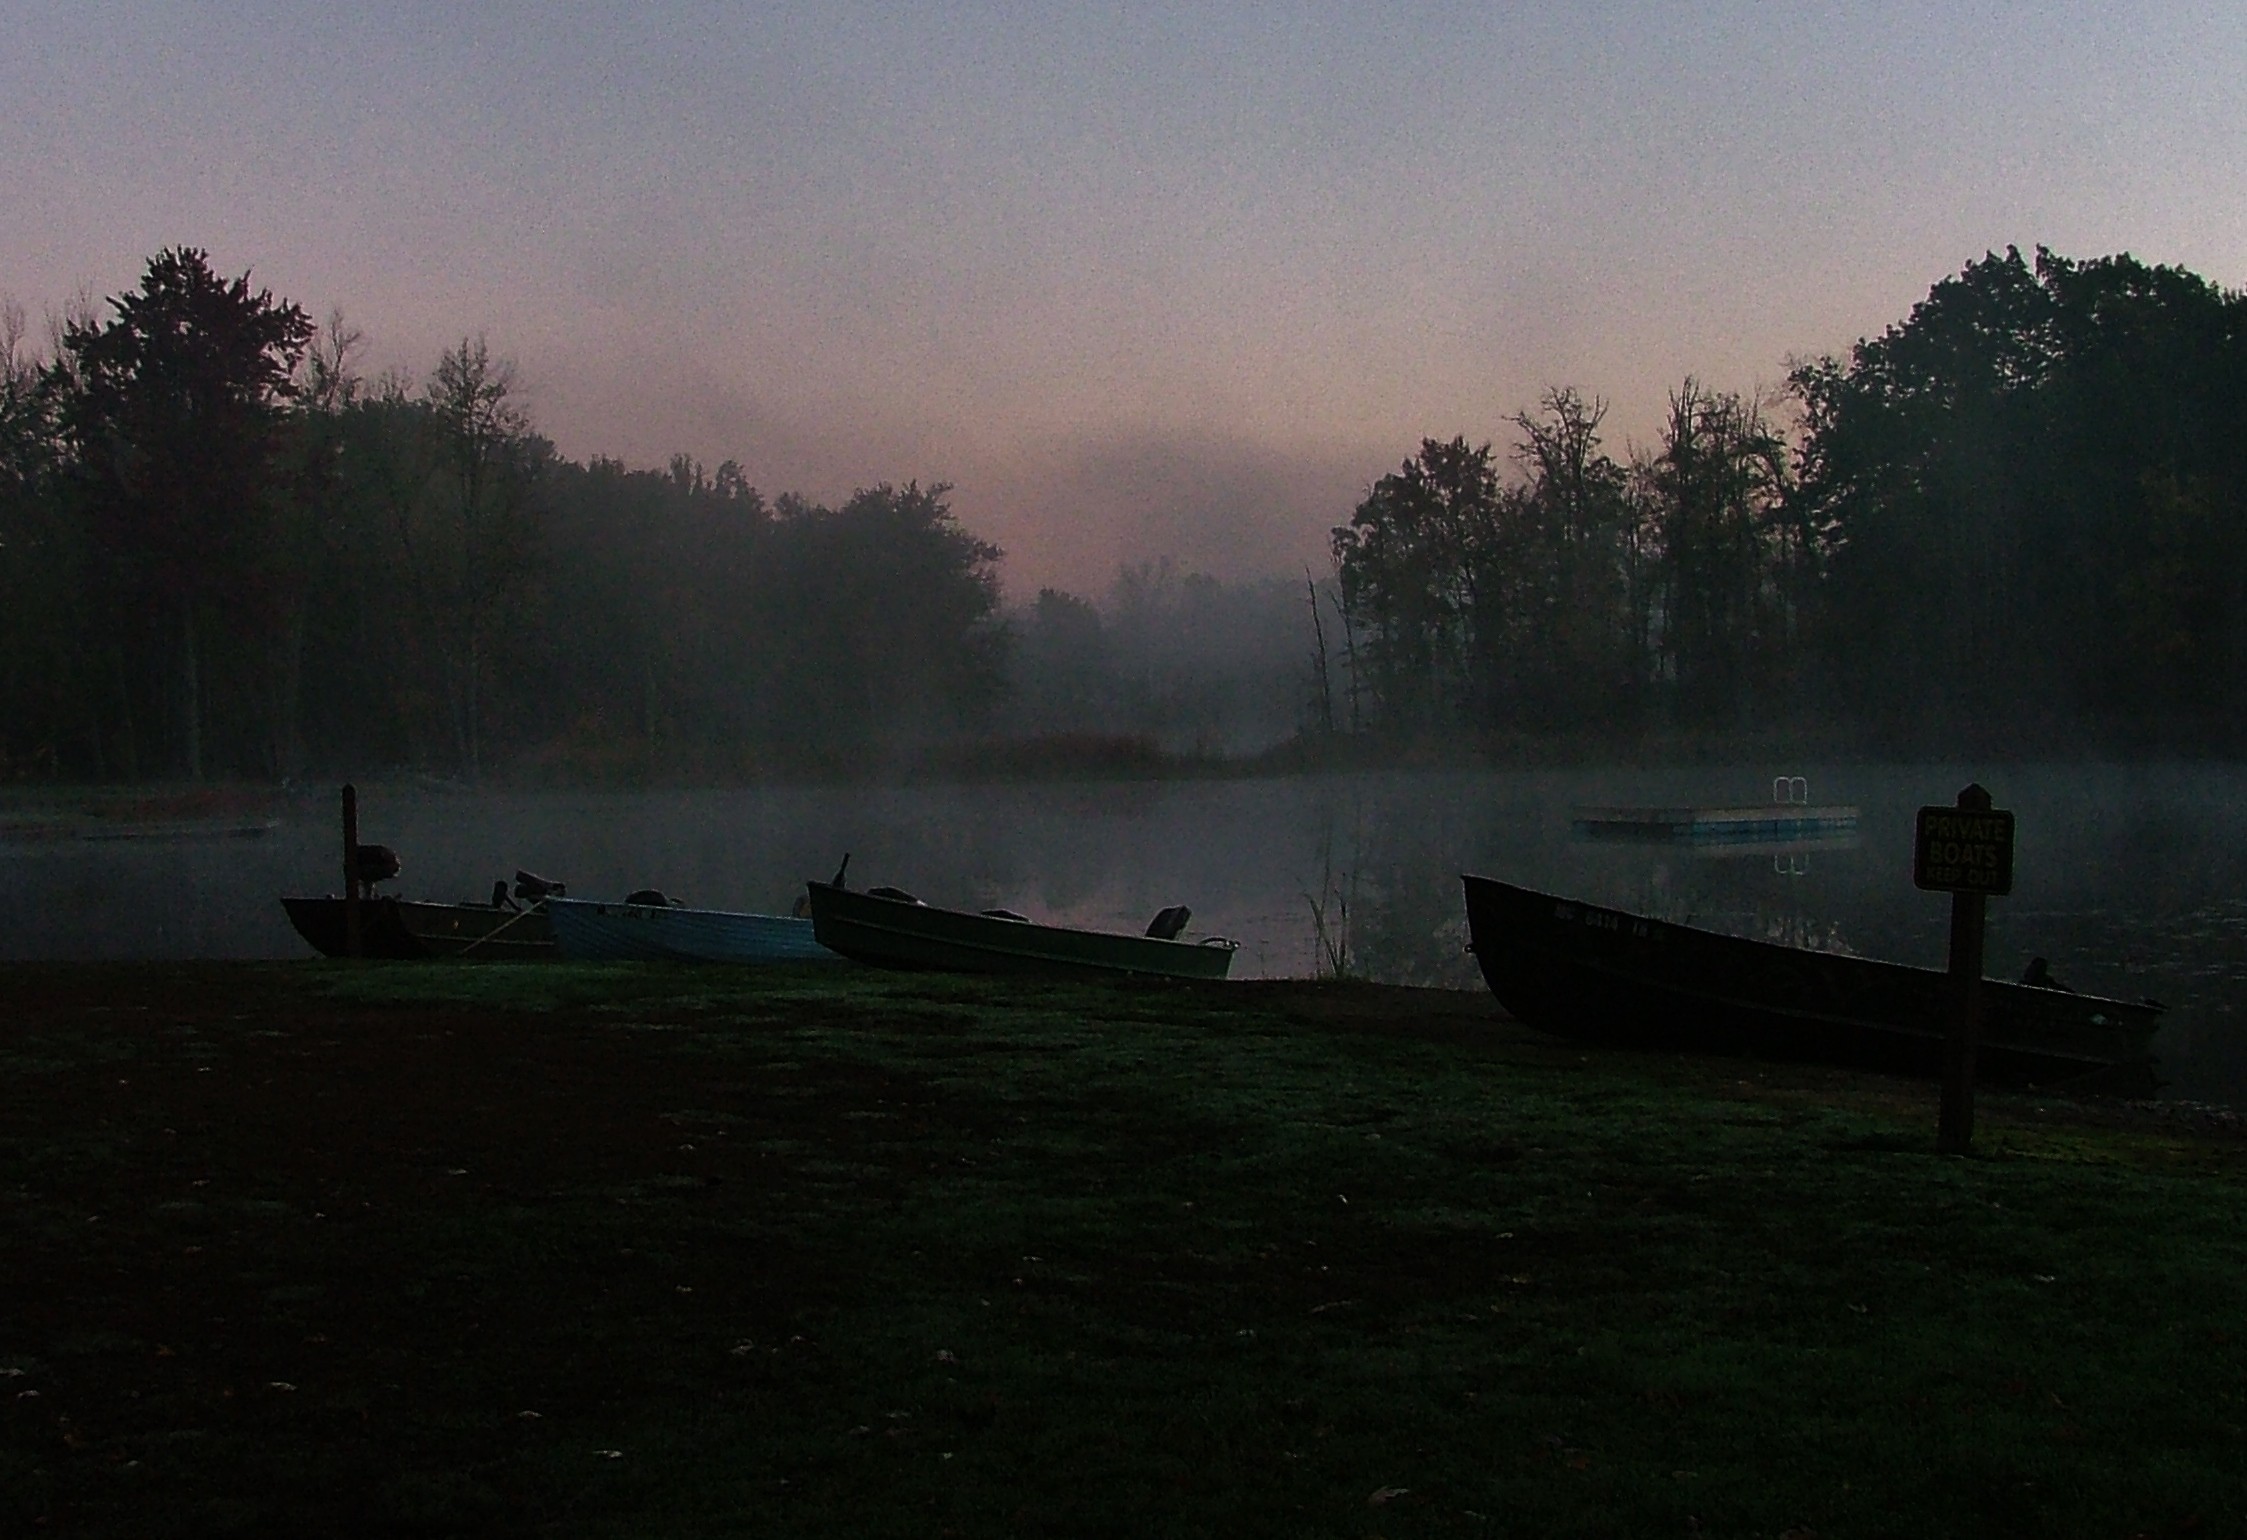 Morning boats in the mist.